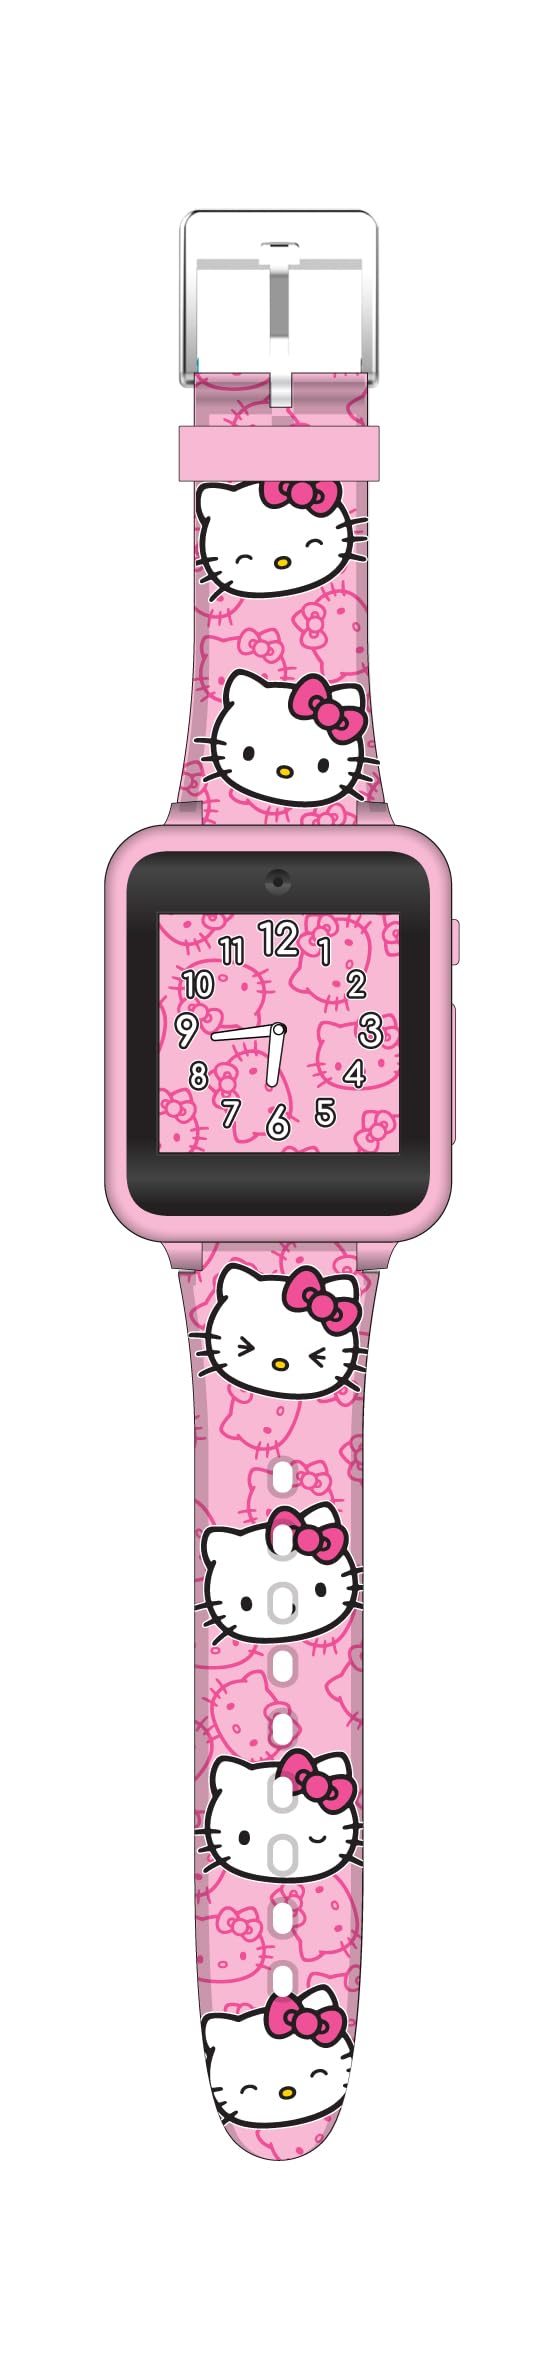 Accutime Hello Kitty Pink Educational Learning Touchscreen Kids Smart Watch - Toy for Girls, Boys, Toddlers - Selfie Cam, Learning Games, Alarm, Calculator, Pedometer & More (Model: HK4185)